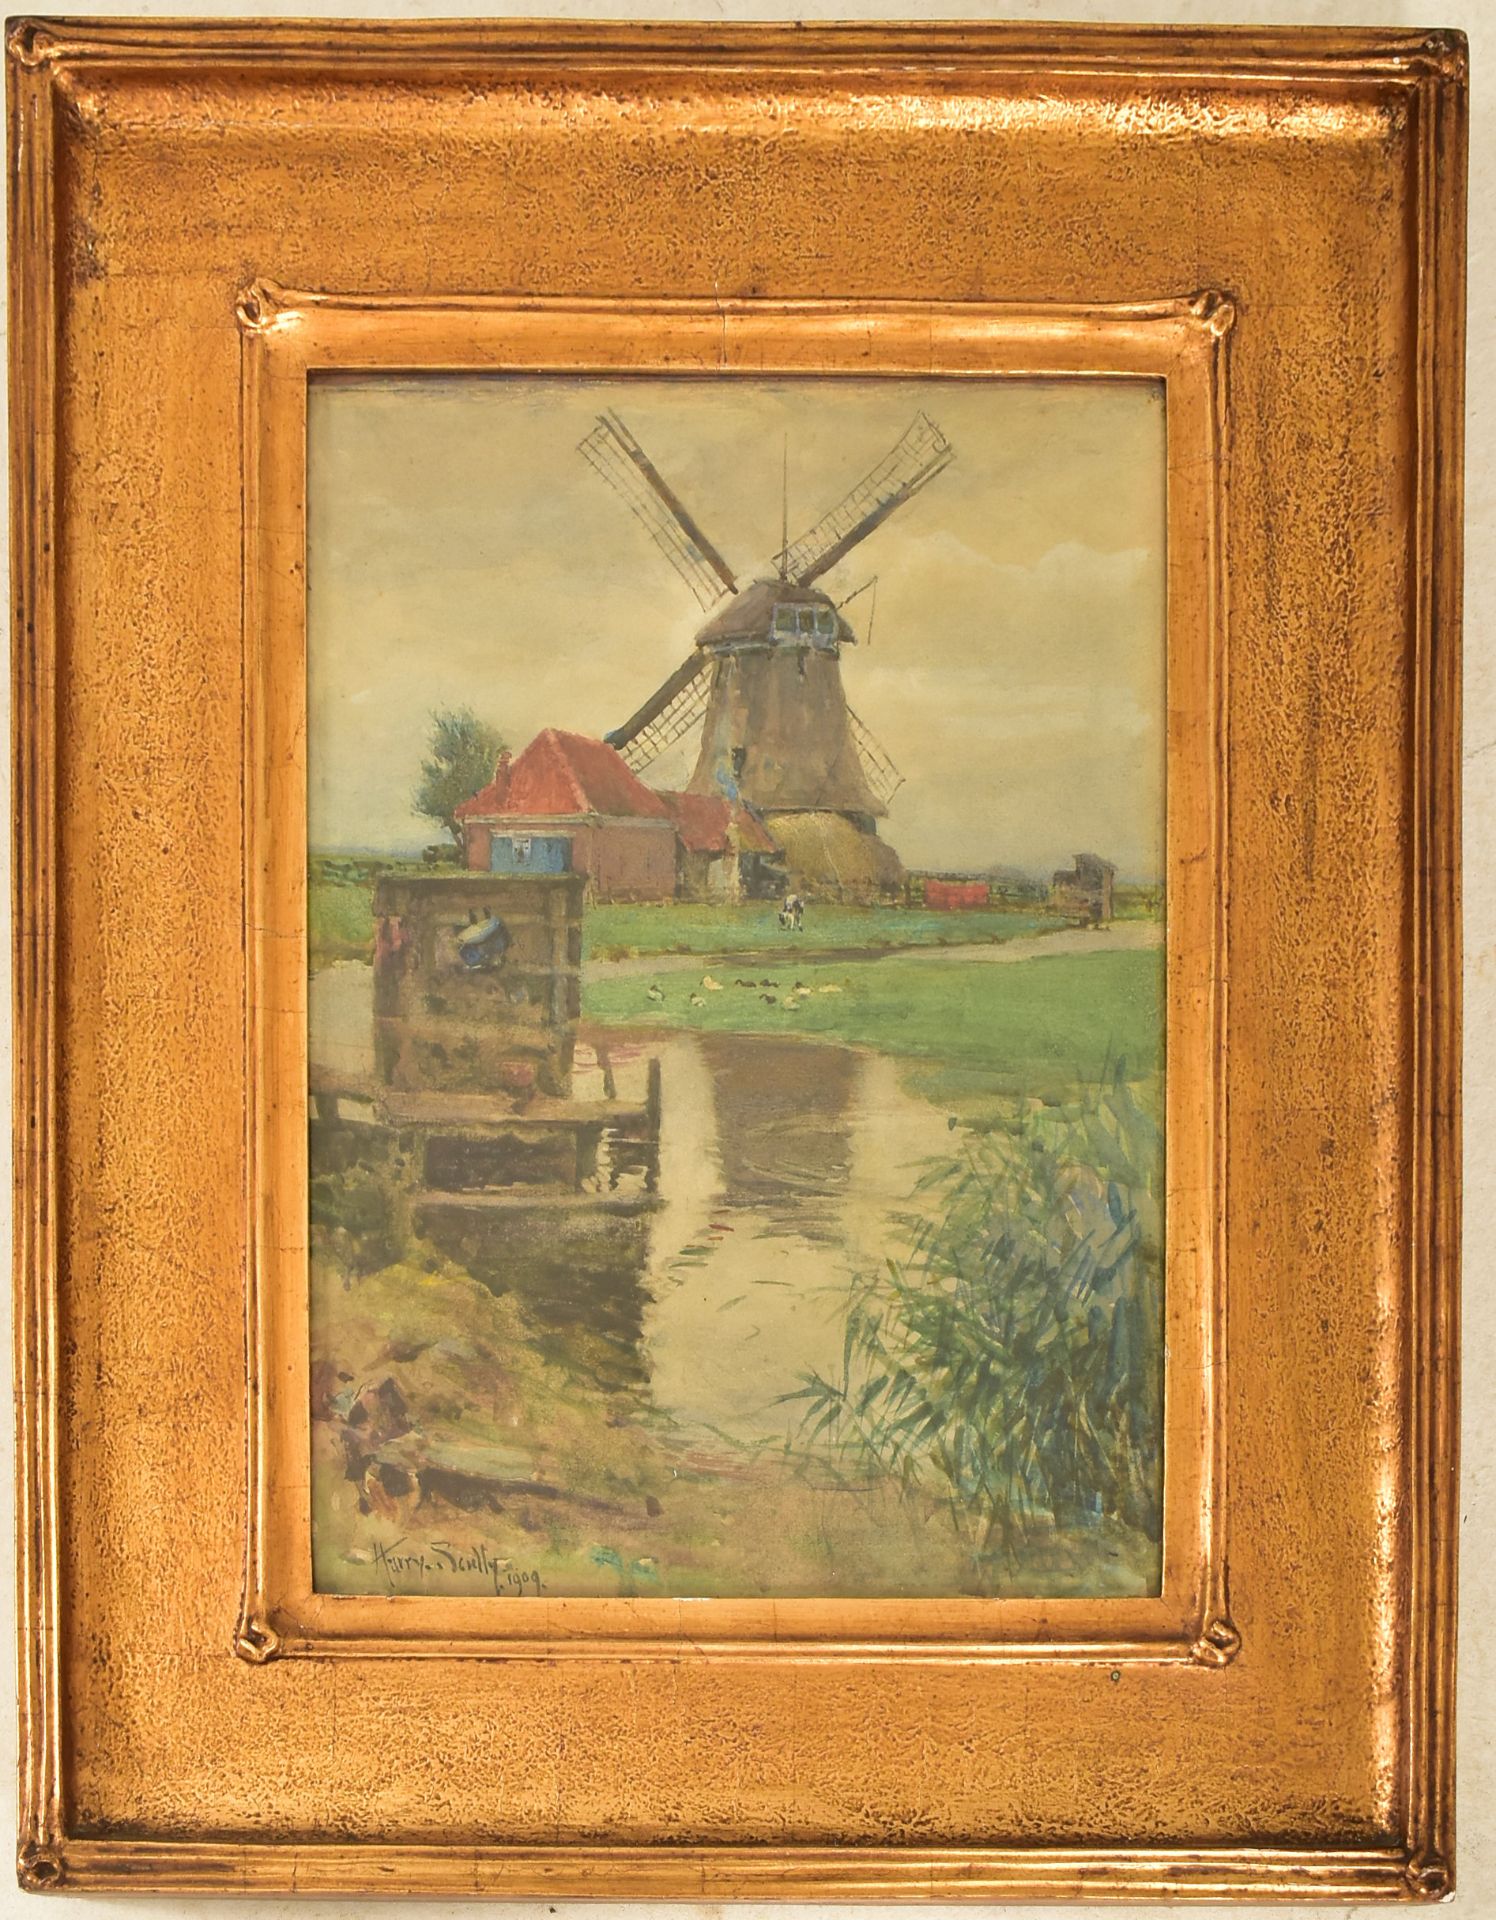 HARRY SCULLY RHA (B. 1863) - WINDMILL WATERCOLOUR - 1909 - Image 2 of 2